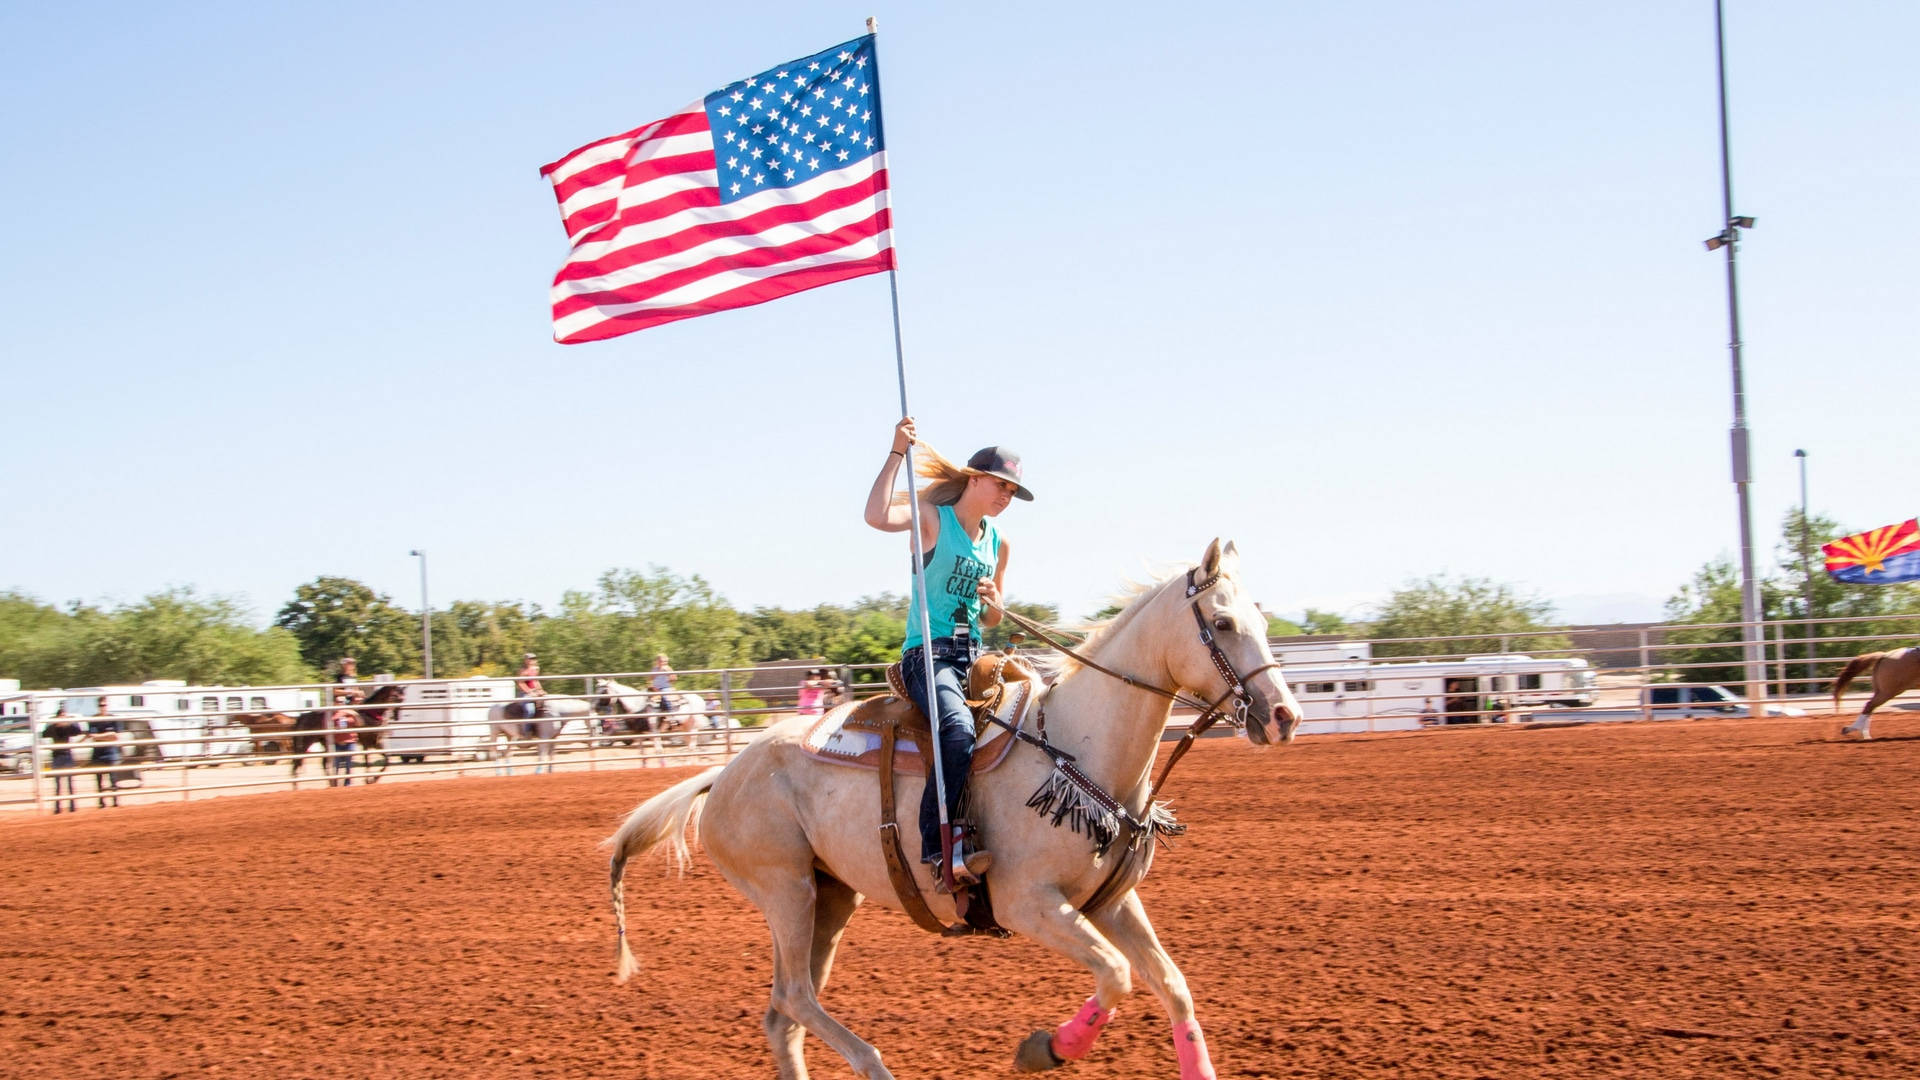 American Flag Hd And Rider Picture